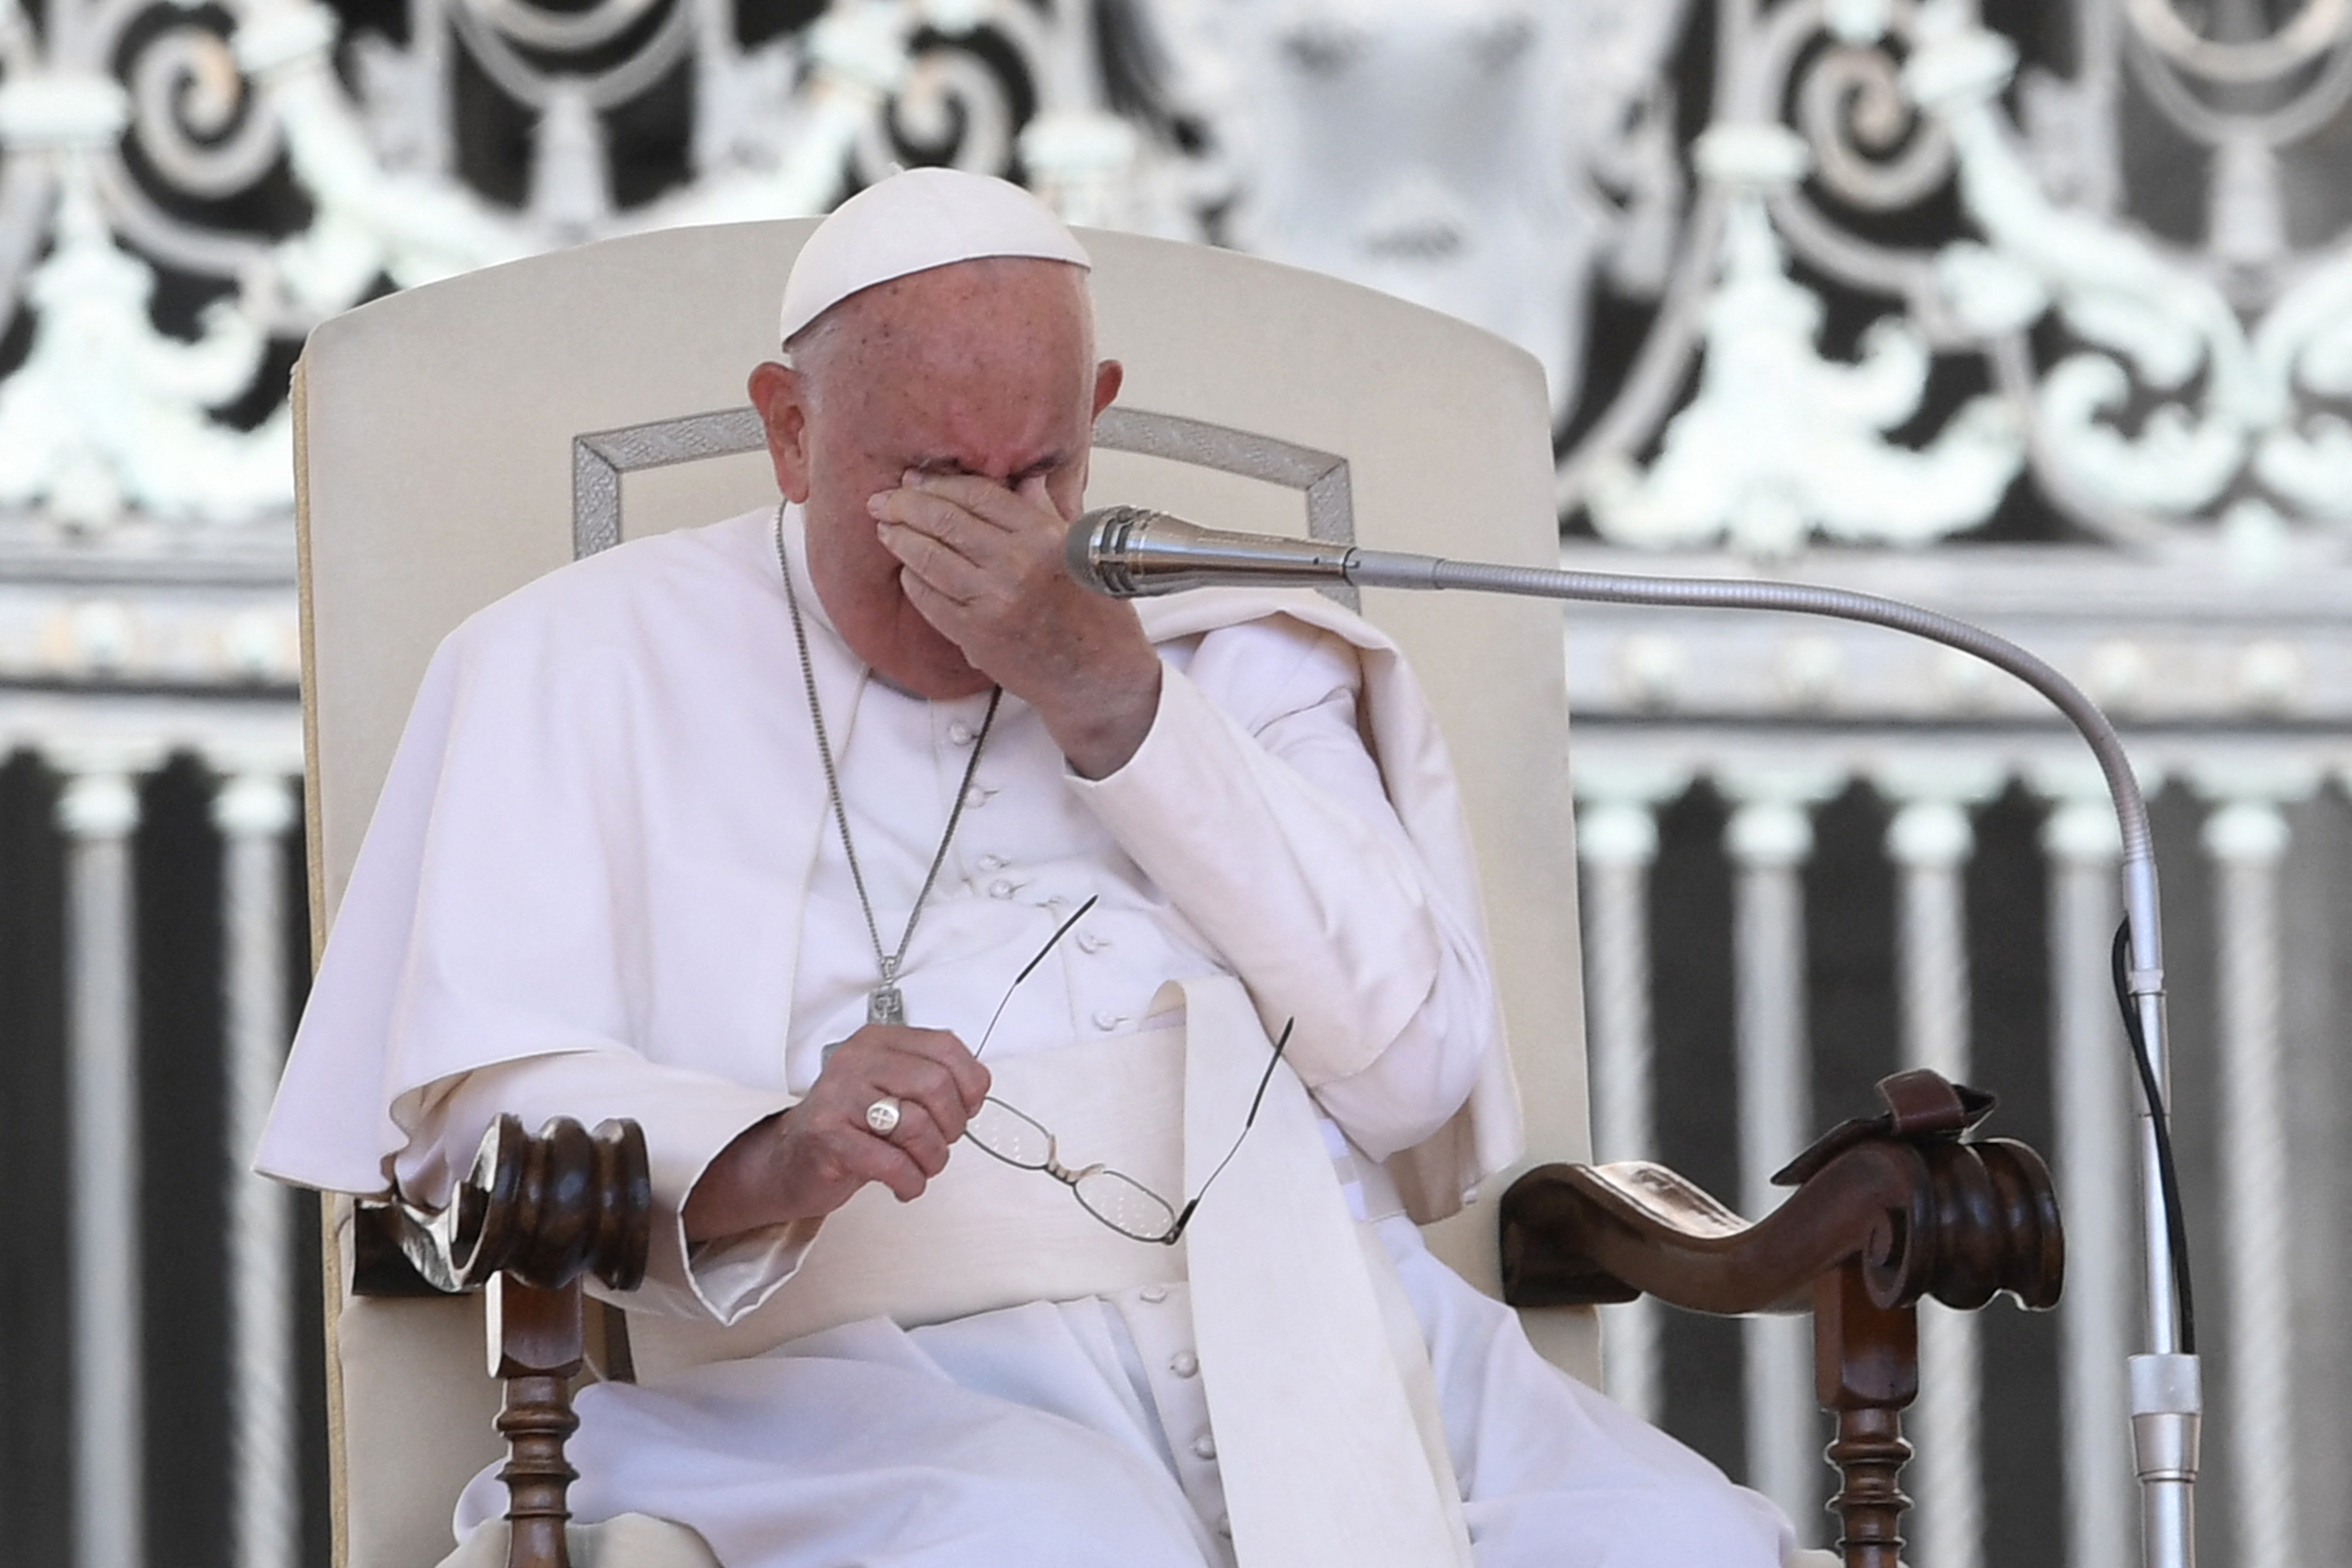 Pope Francis urges priests not to bore worshippers with long sermons